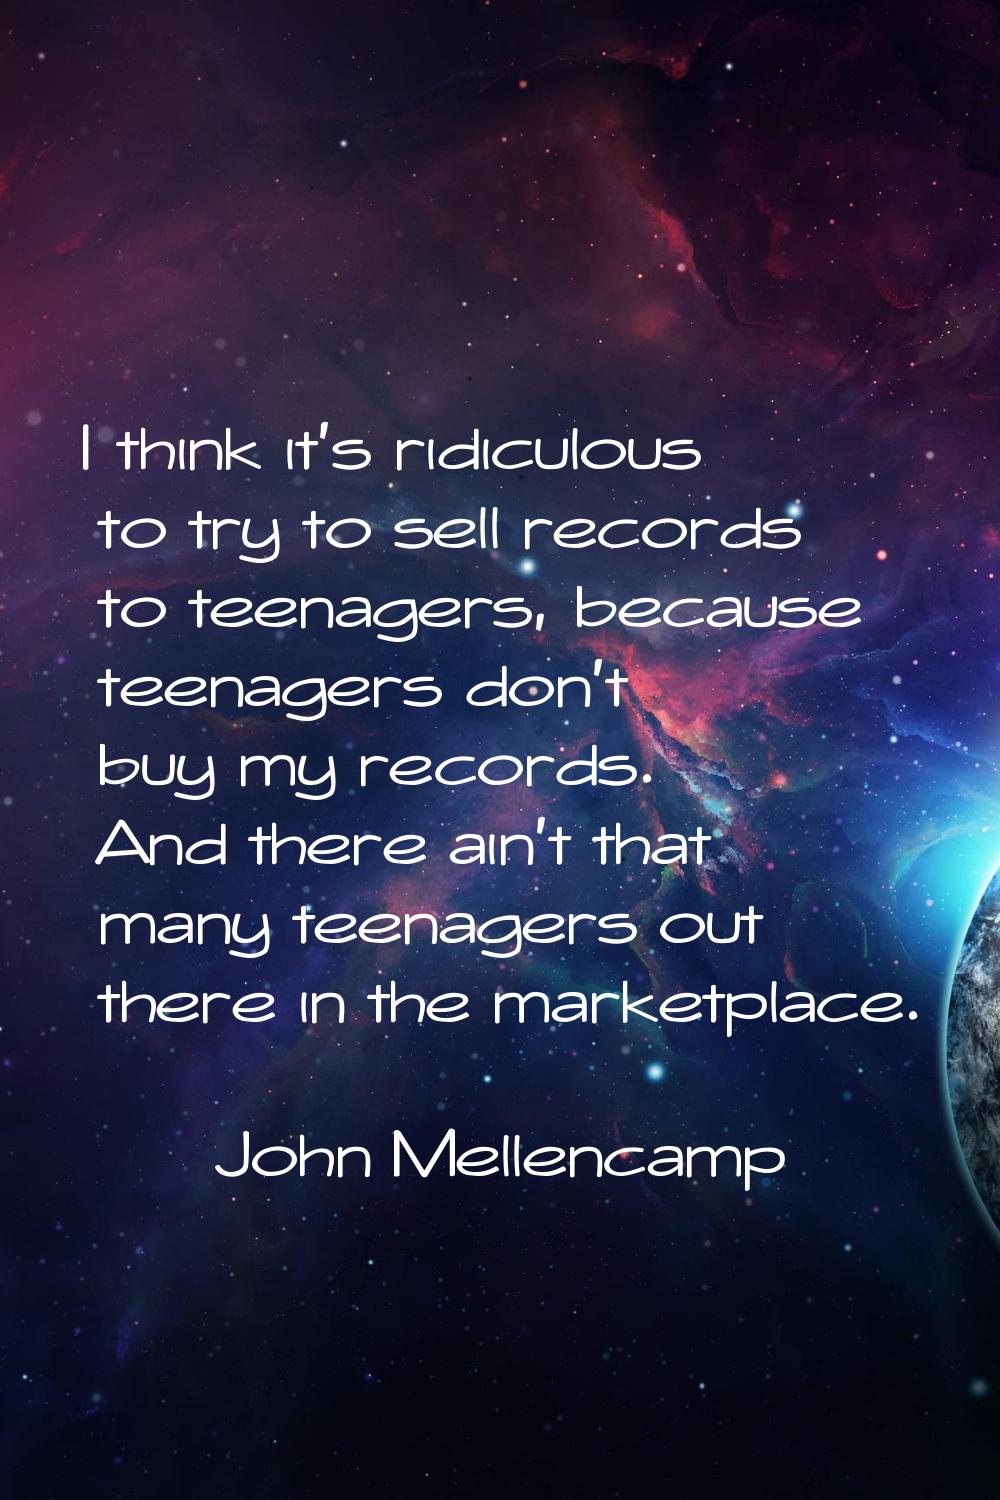 I think it's ridiculous to try to sell records to teenagers, because teenagers don't buy my records